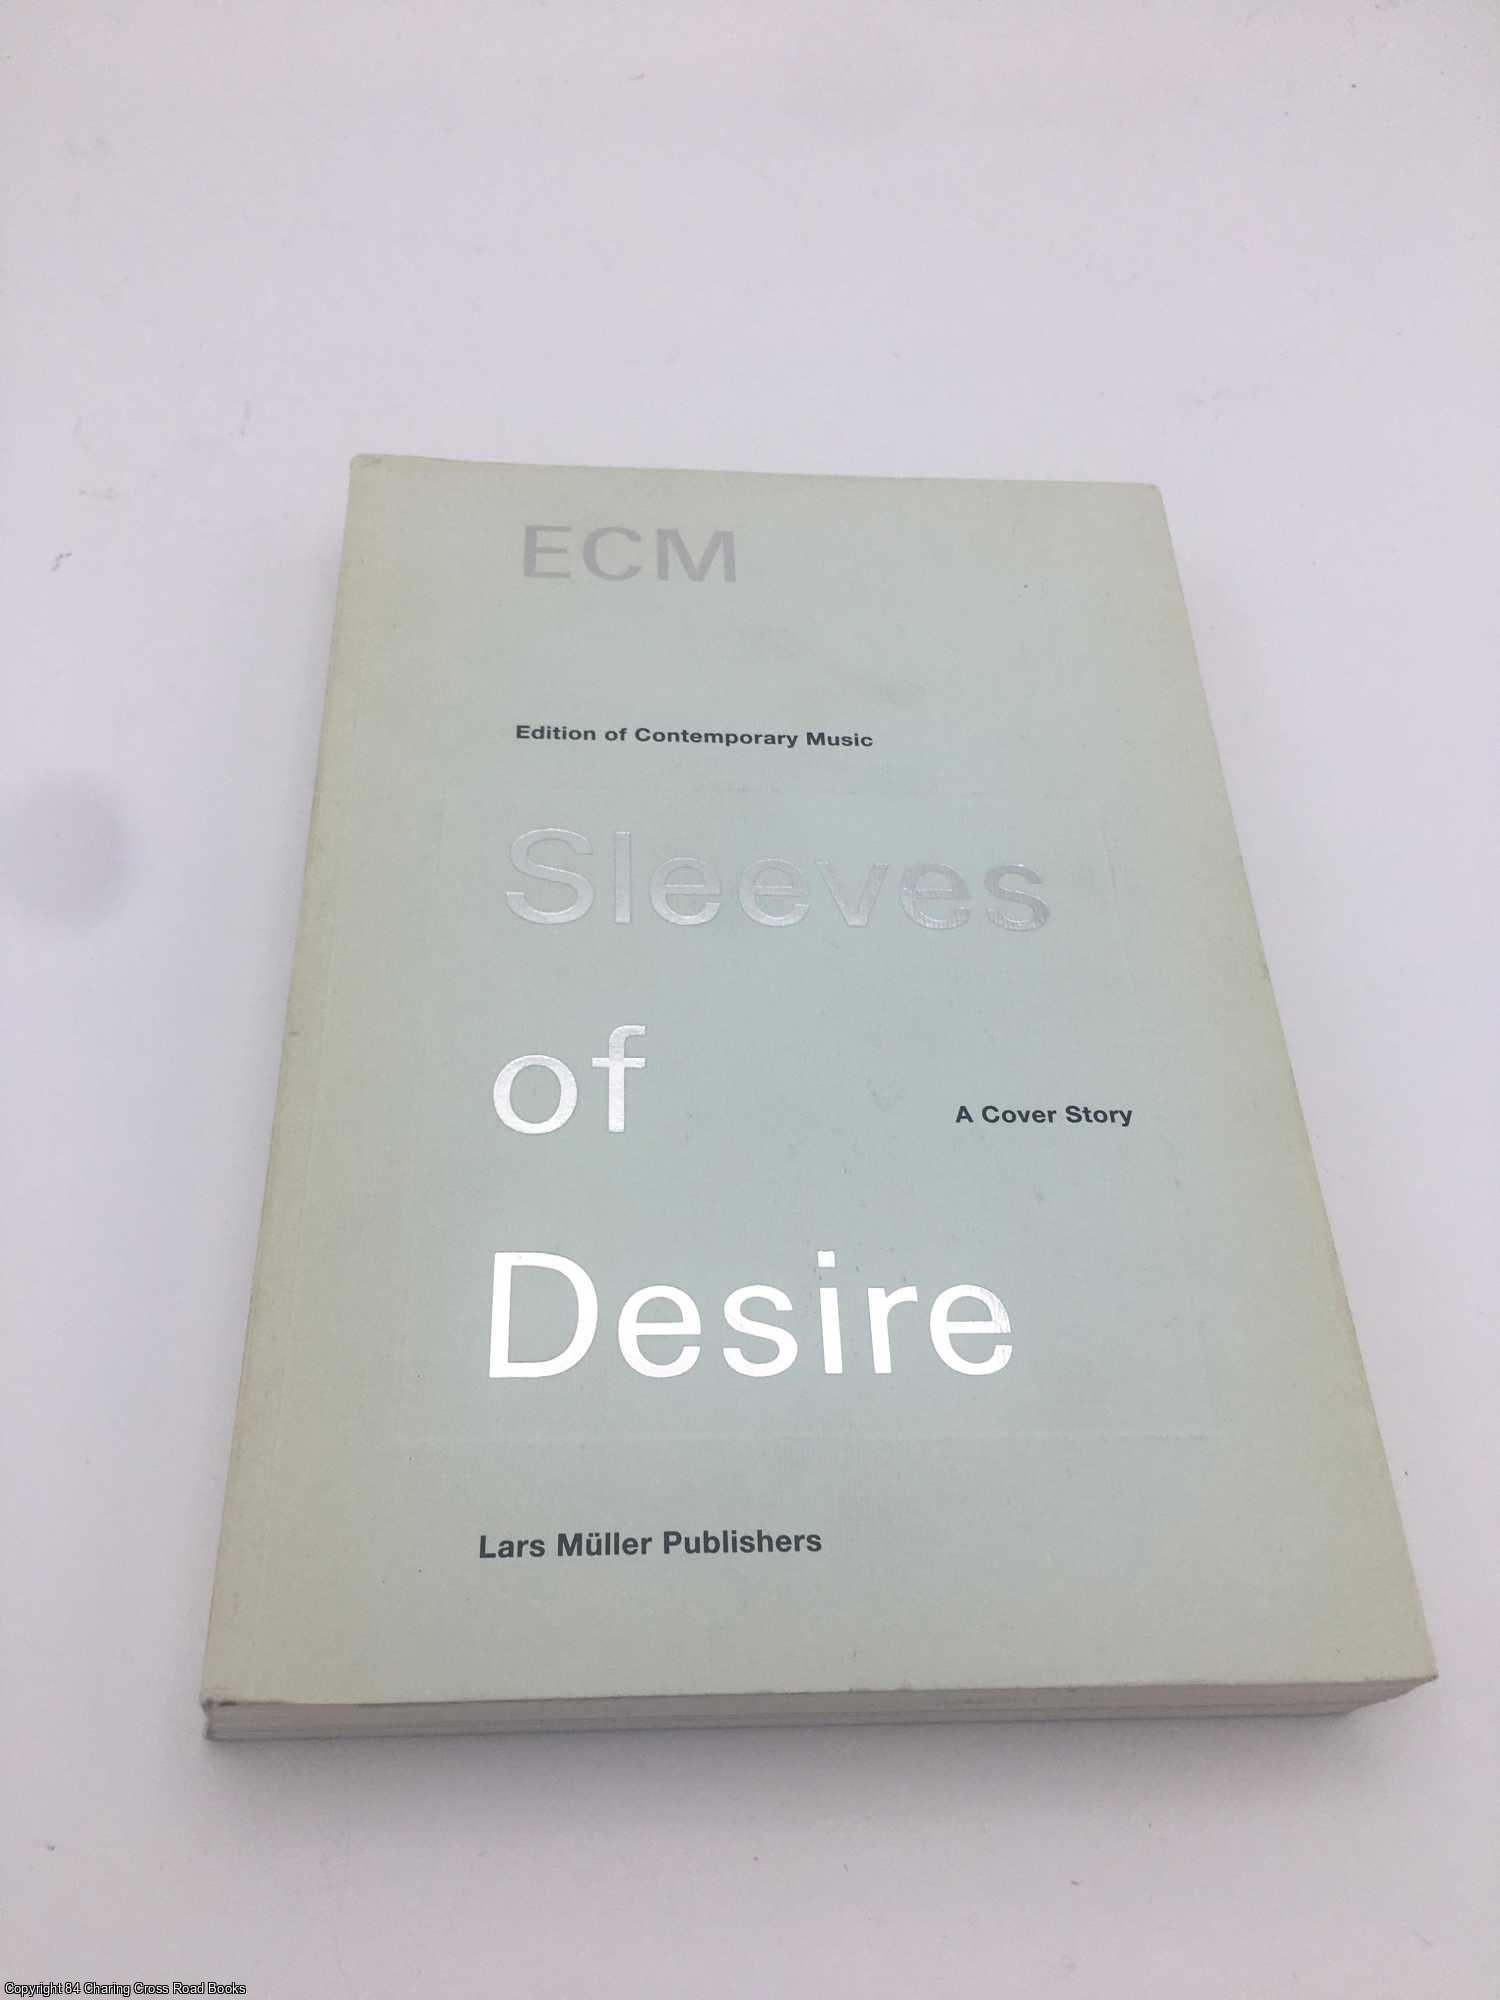 ECM: Sleeves of Desire: A Cover Story | Lars Müller | First Edition